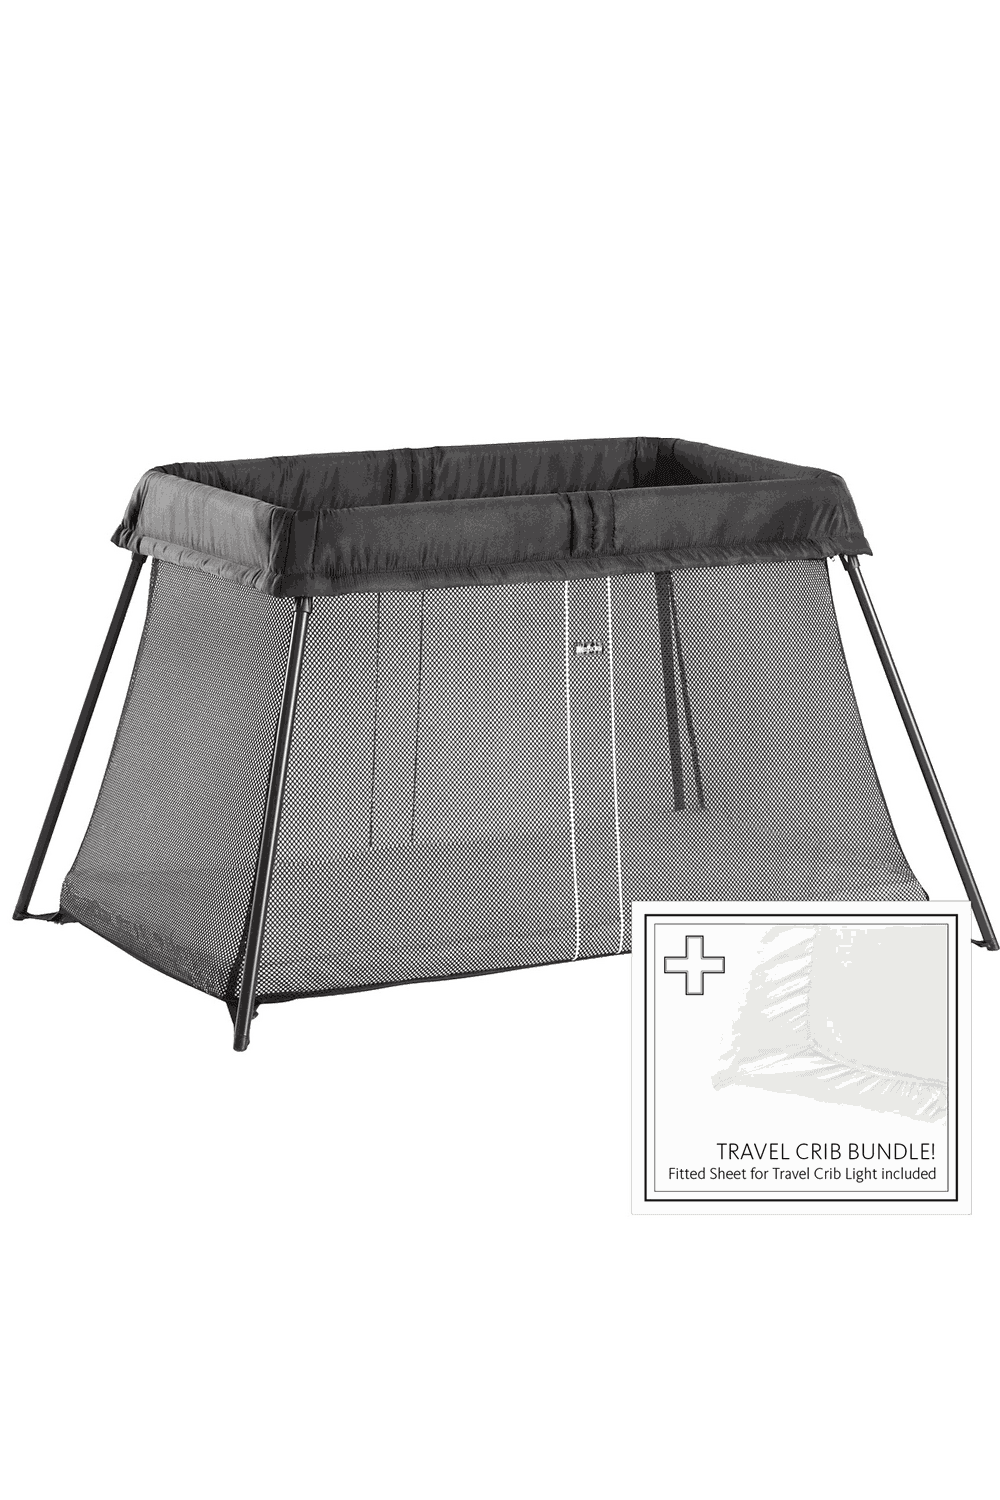 BabyBjorn Travel Crib Light Black and Fitted Sheet Bundle Pack ...